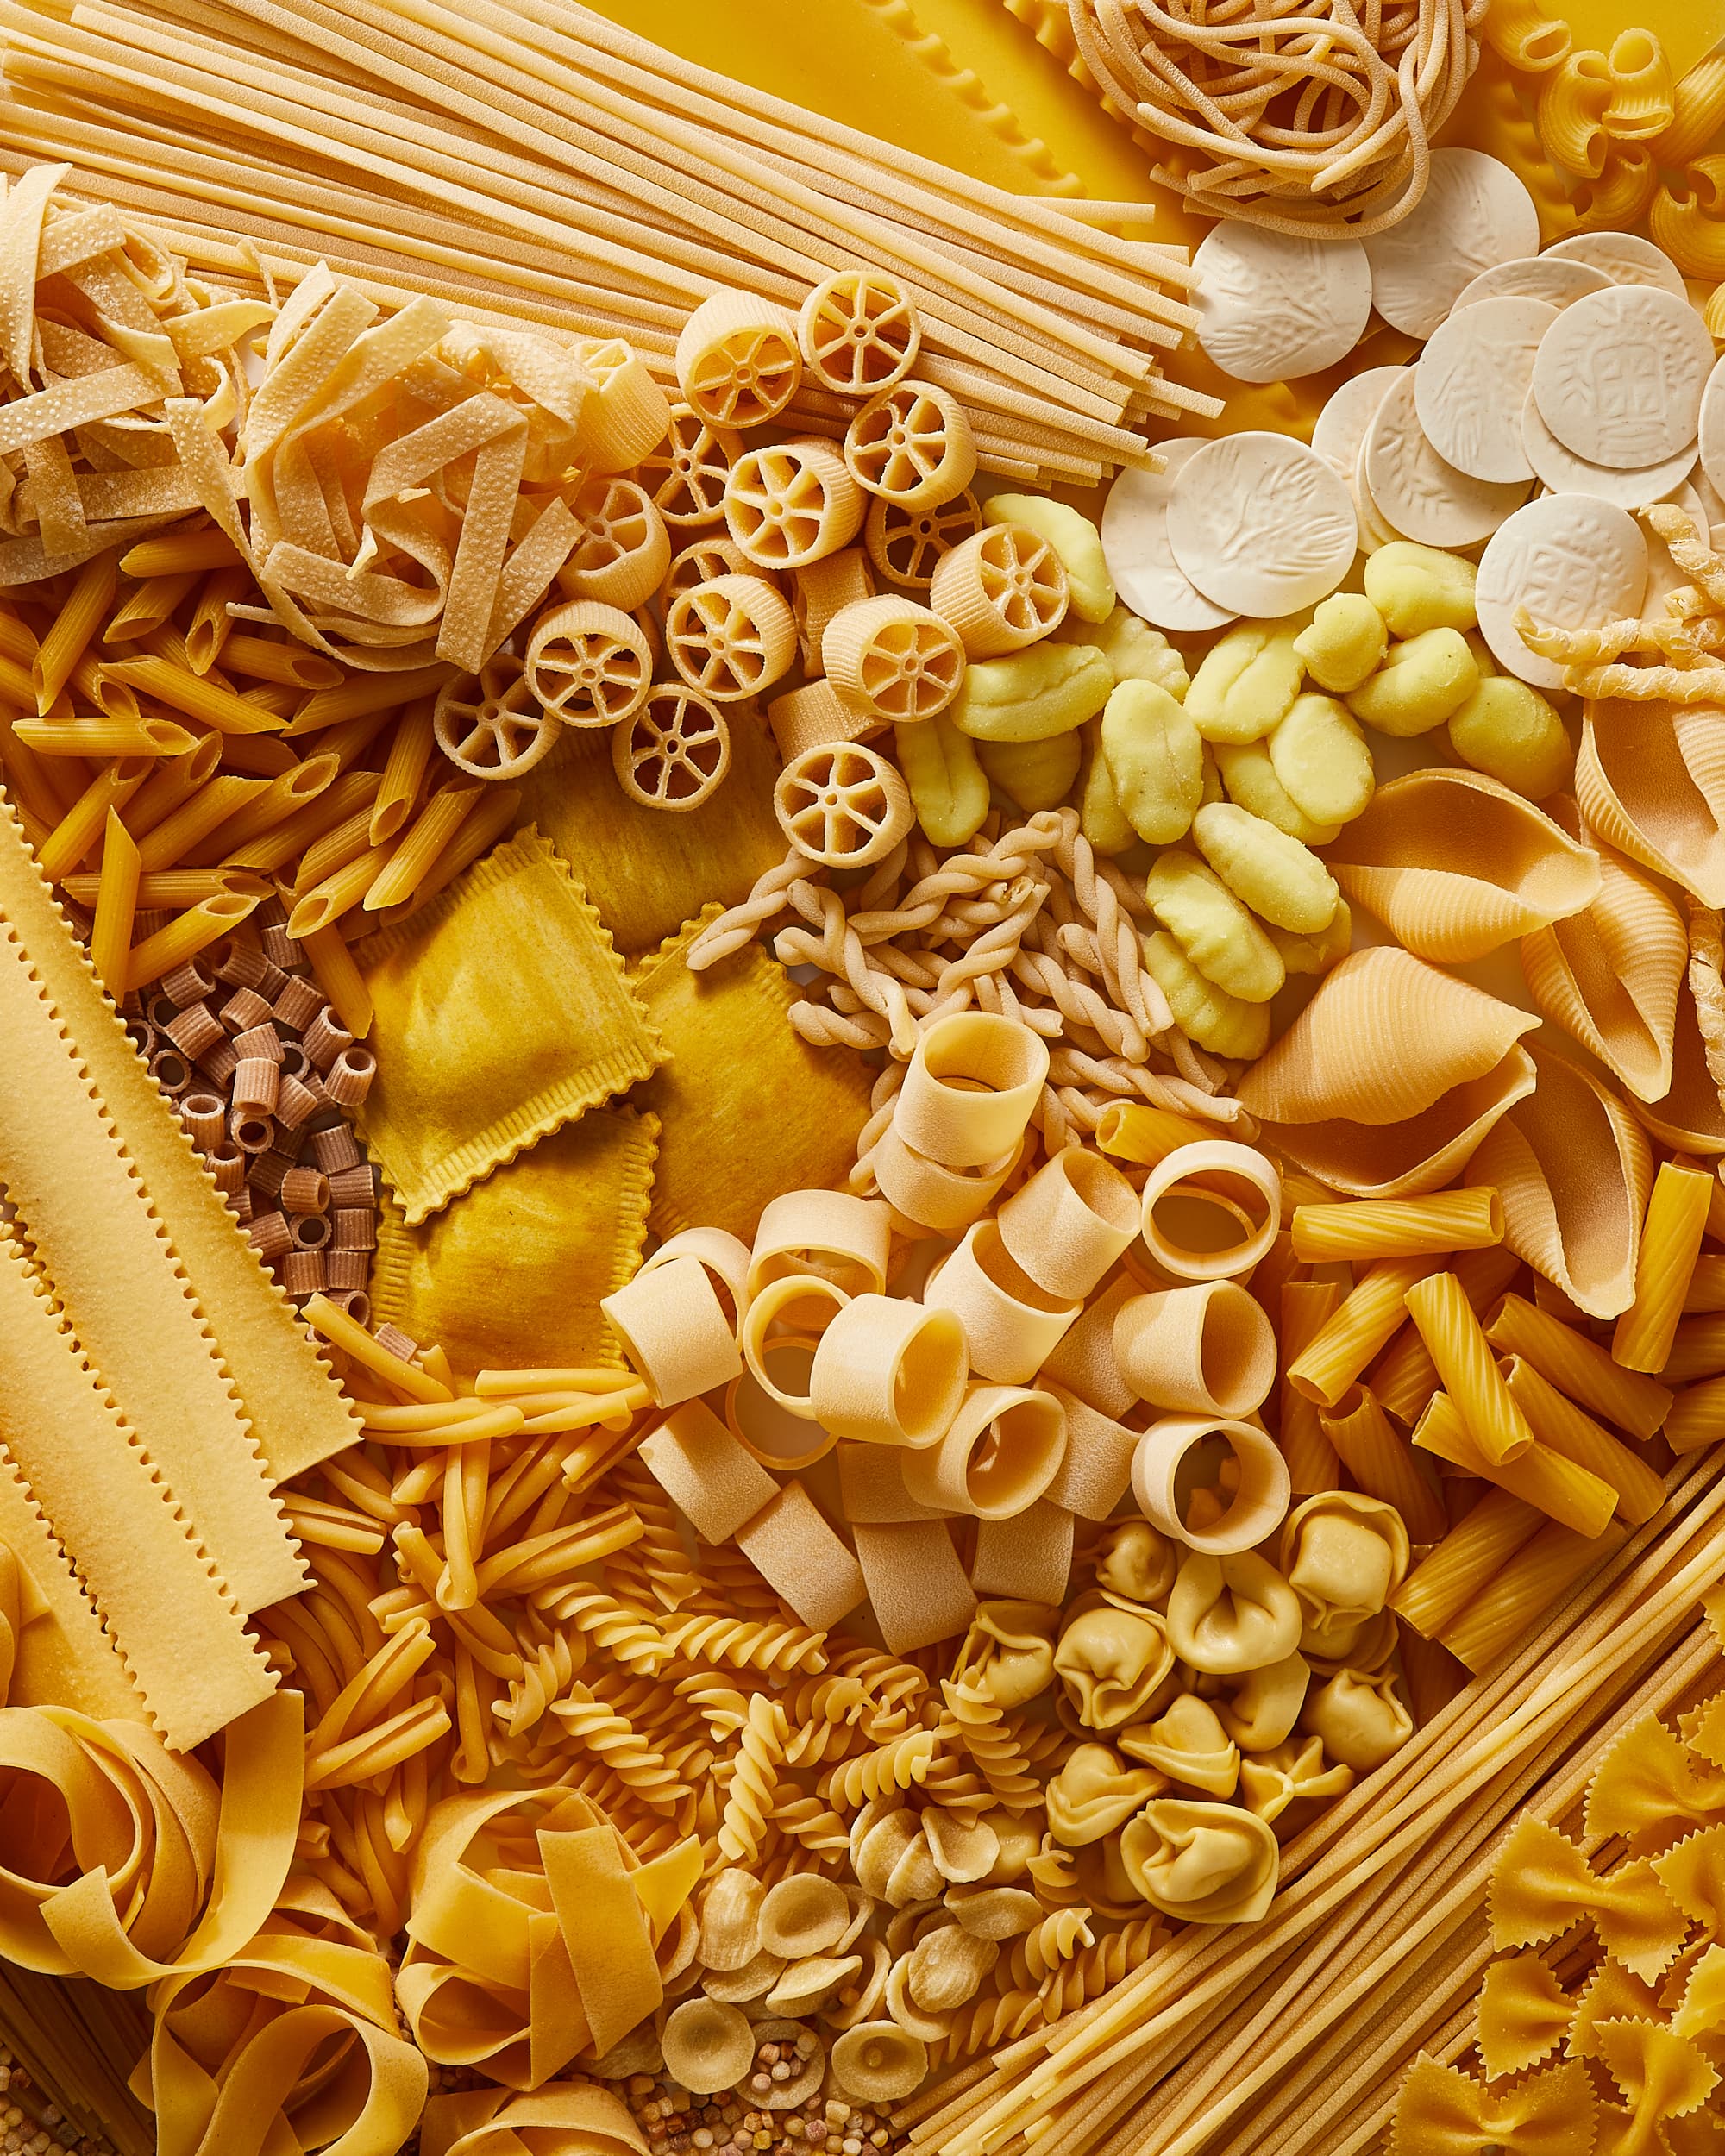 Choose right for your type: pasta shapes and their sauce